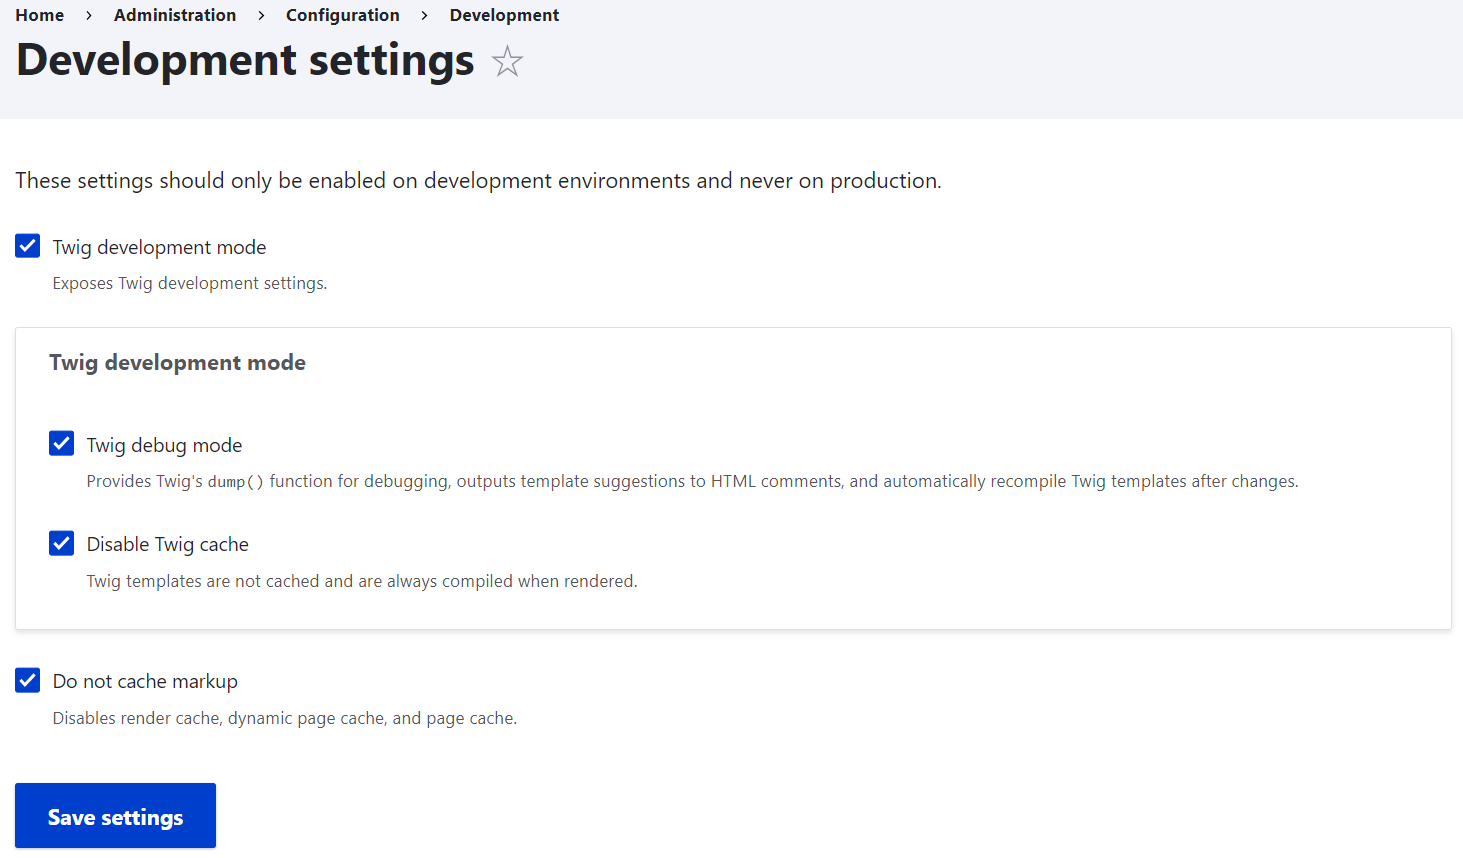 Enabling Twig development mode and disabling the caching via the new “Development settings” page.